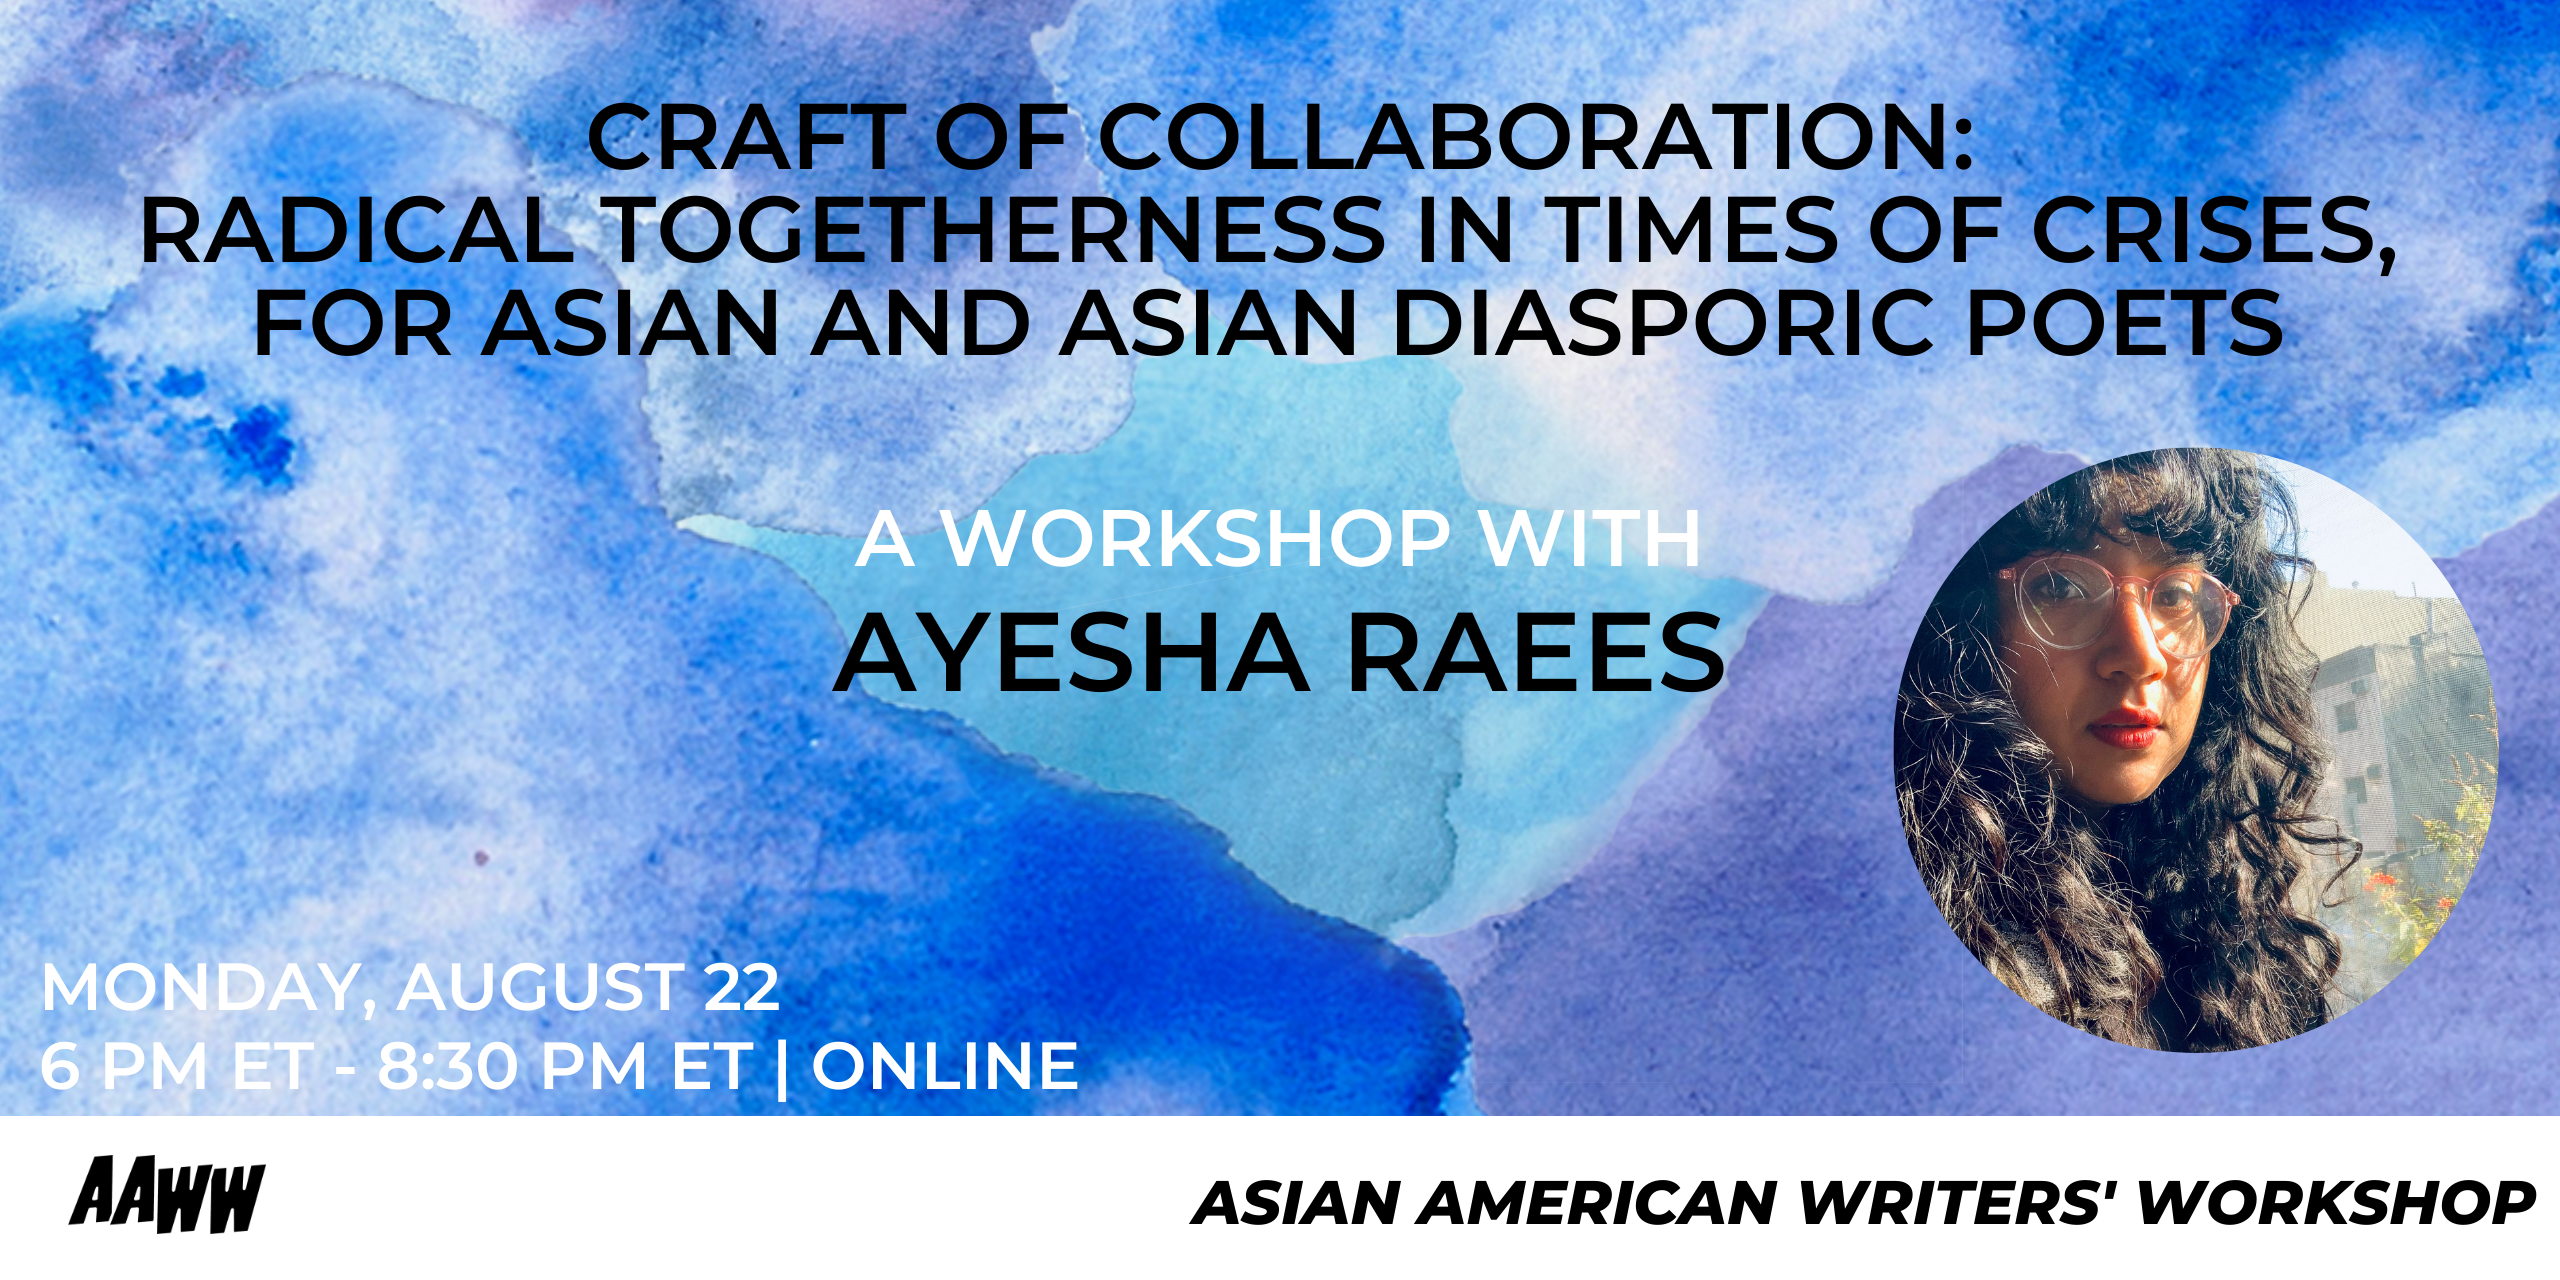 [VIRTUAL] WORKSHOP: Craft Of Collaboration: Radical Togetherness In Times Of Crises, a Workshop for Asian and Asian Diasporic Poets